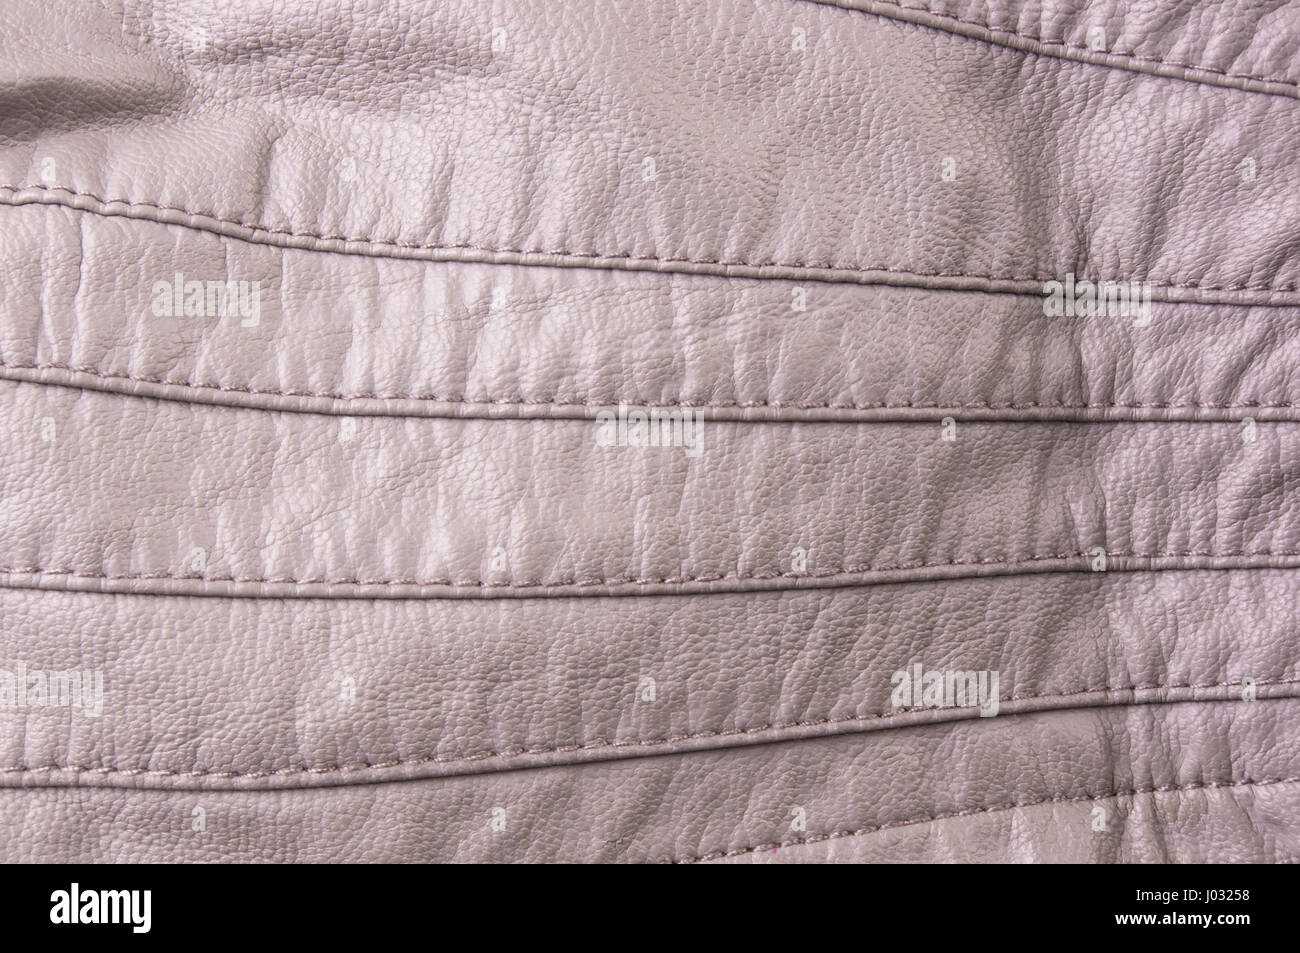 texture beige leather jacket with seams, close-up Stock Photo